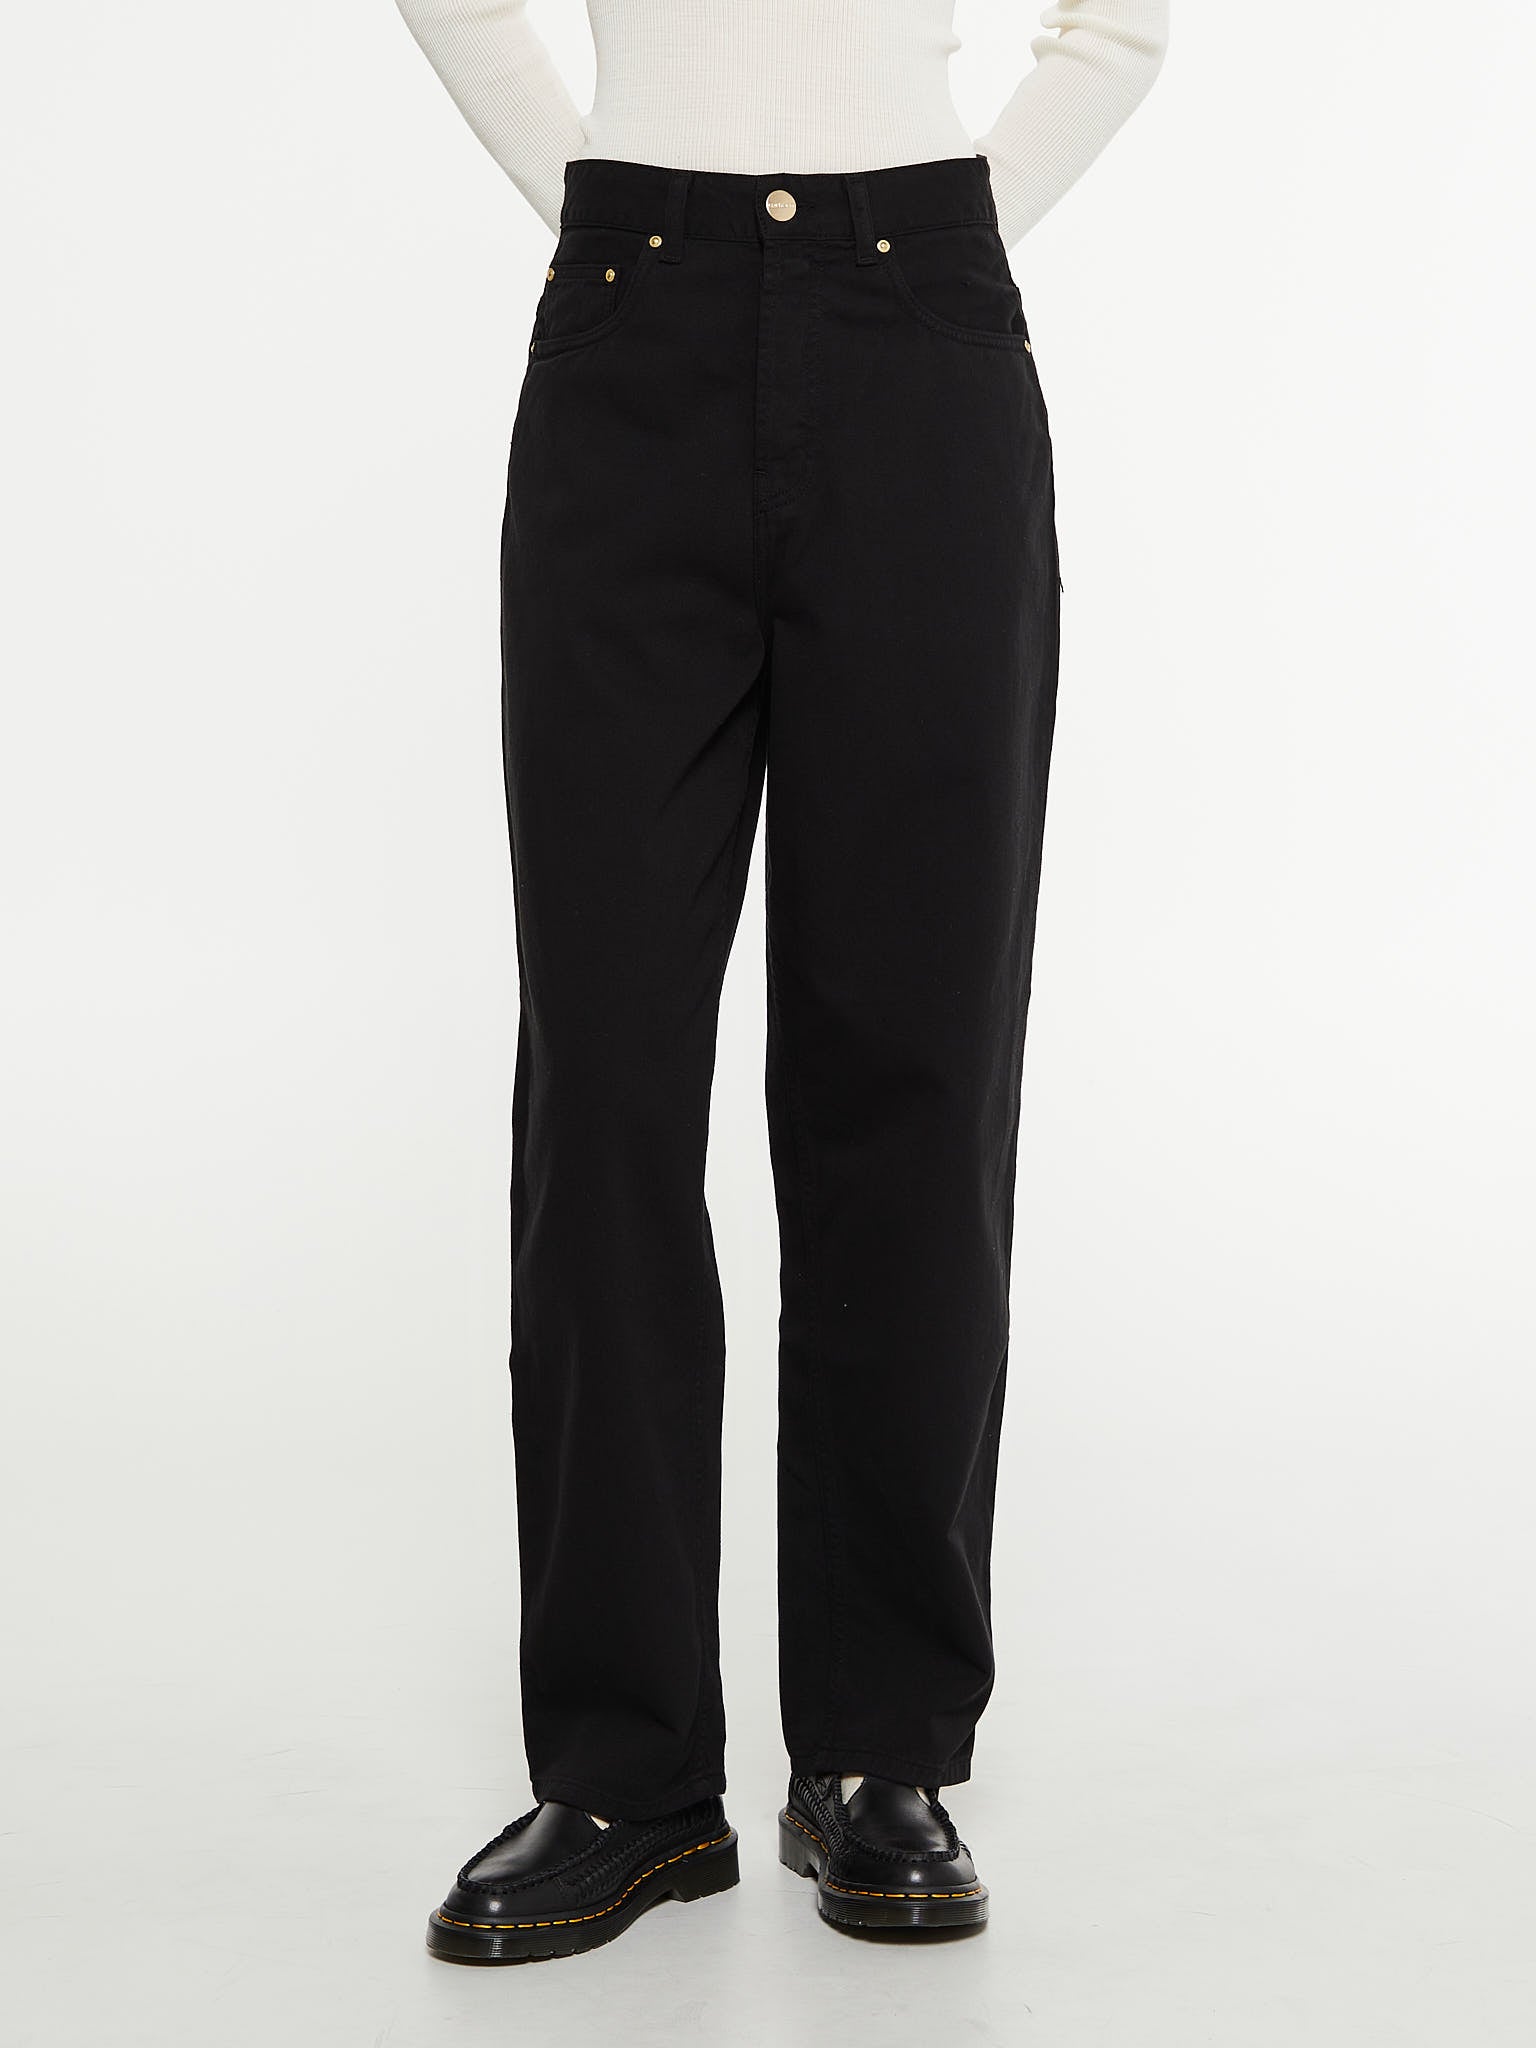 Women's Derby Pant in Black Garment Dyed